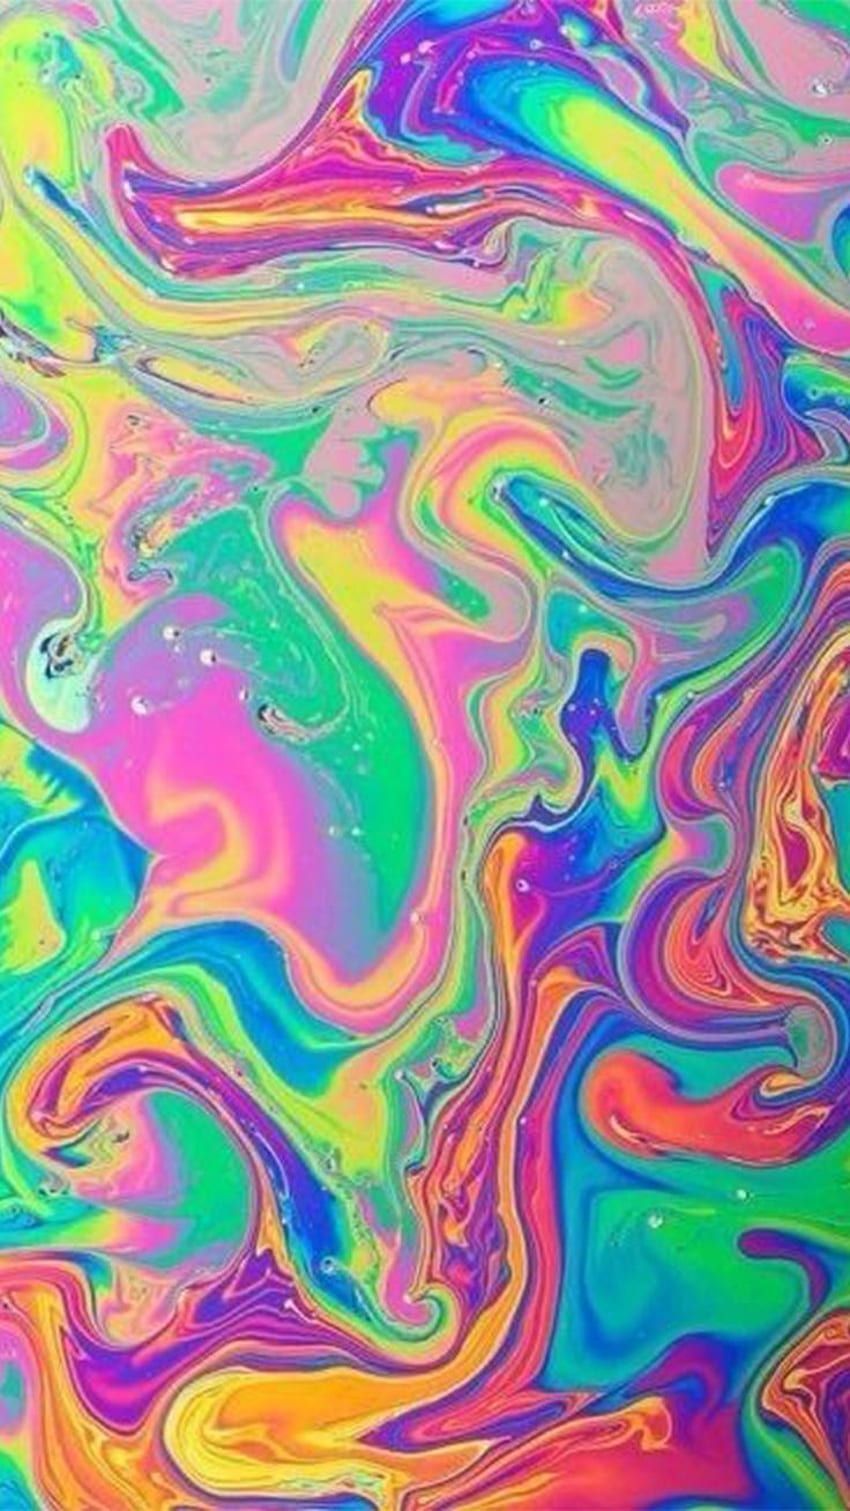 Rainbow colors are swirled together in this psychedelic aesthetic mobile oil wallpaper. - Psychedelic